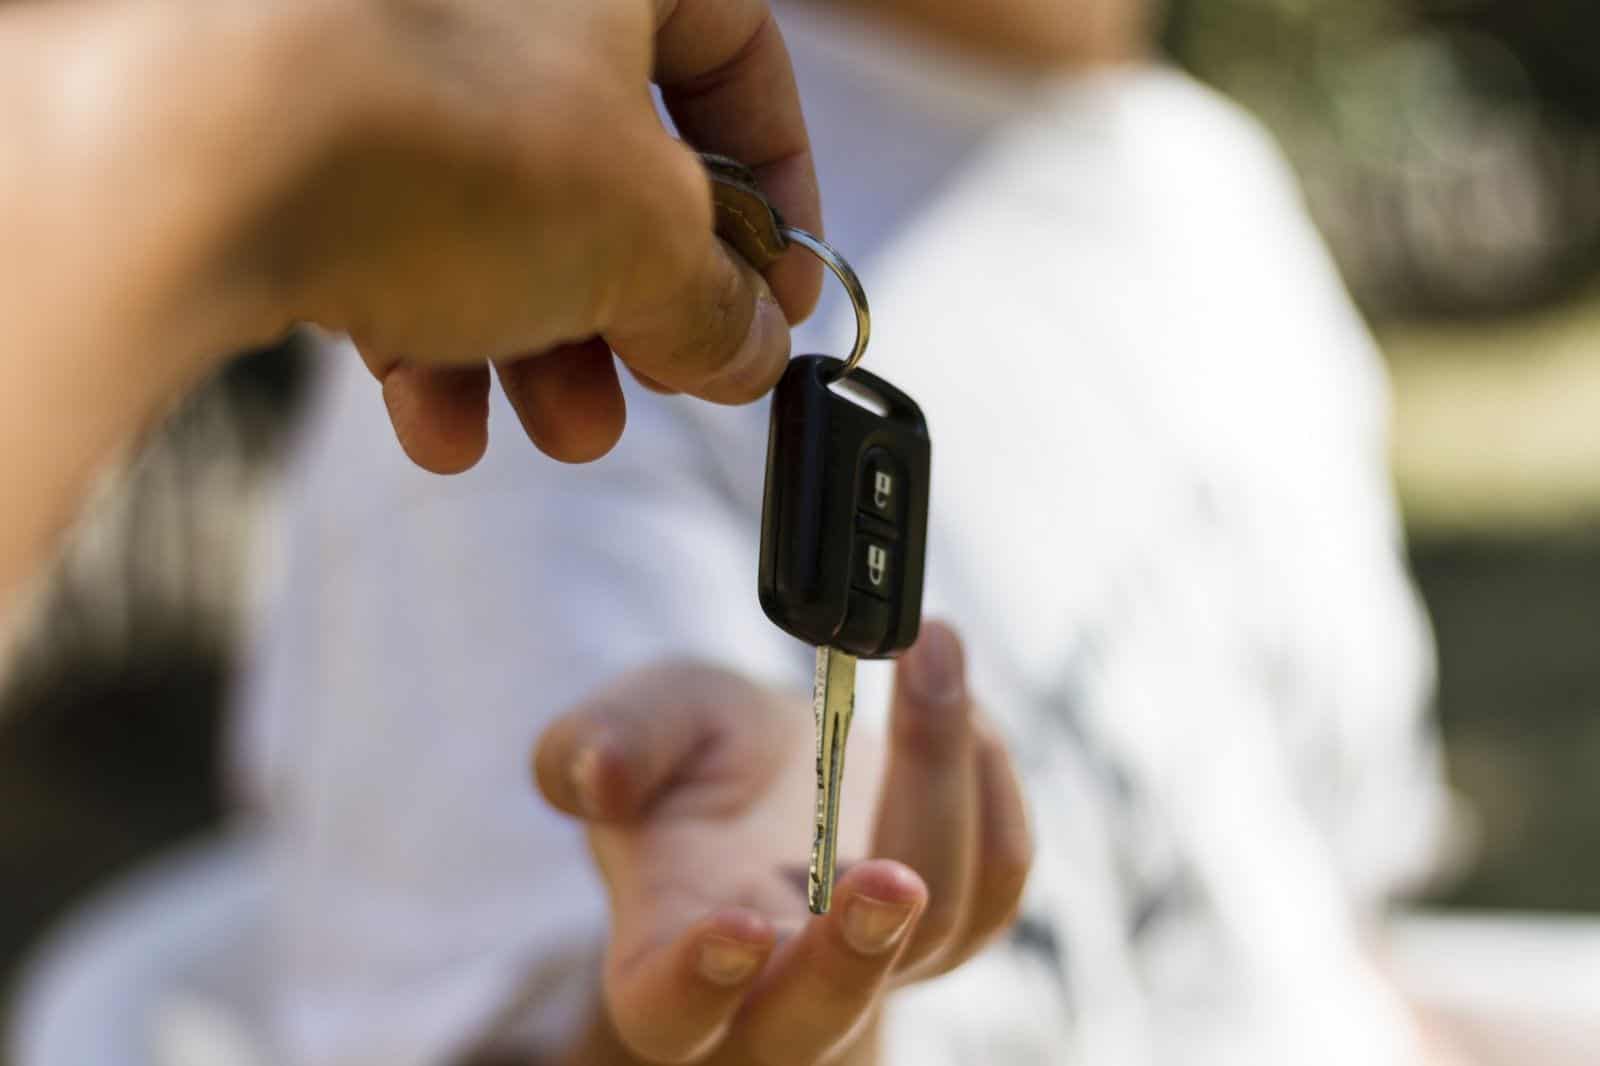 handing over car key after driving prohibition